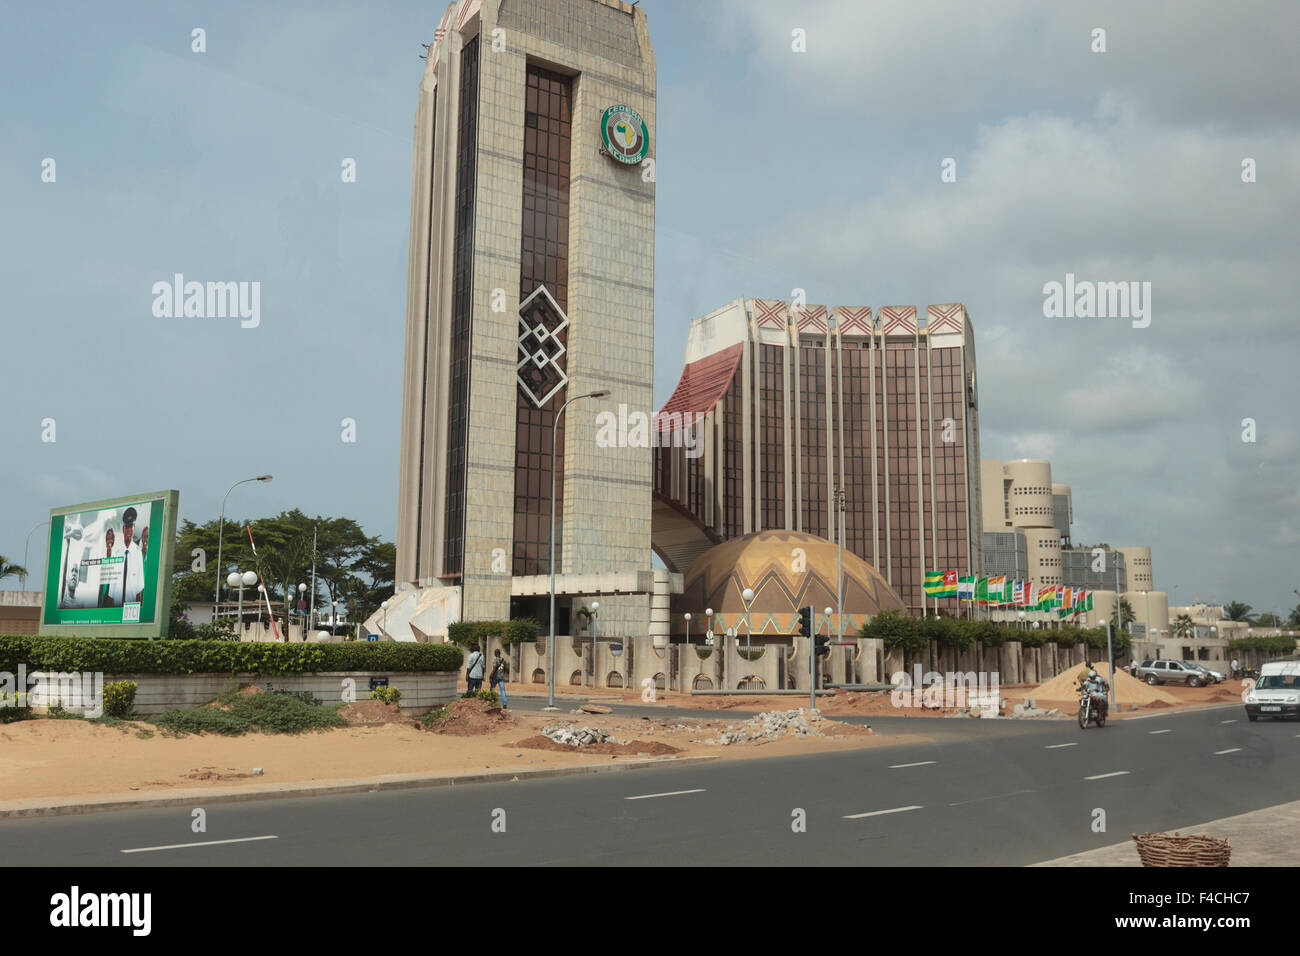 Africa, West Africa, Togo, Lome. Eonoic Community of West African States building. Stock Photo